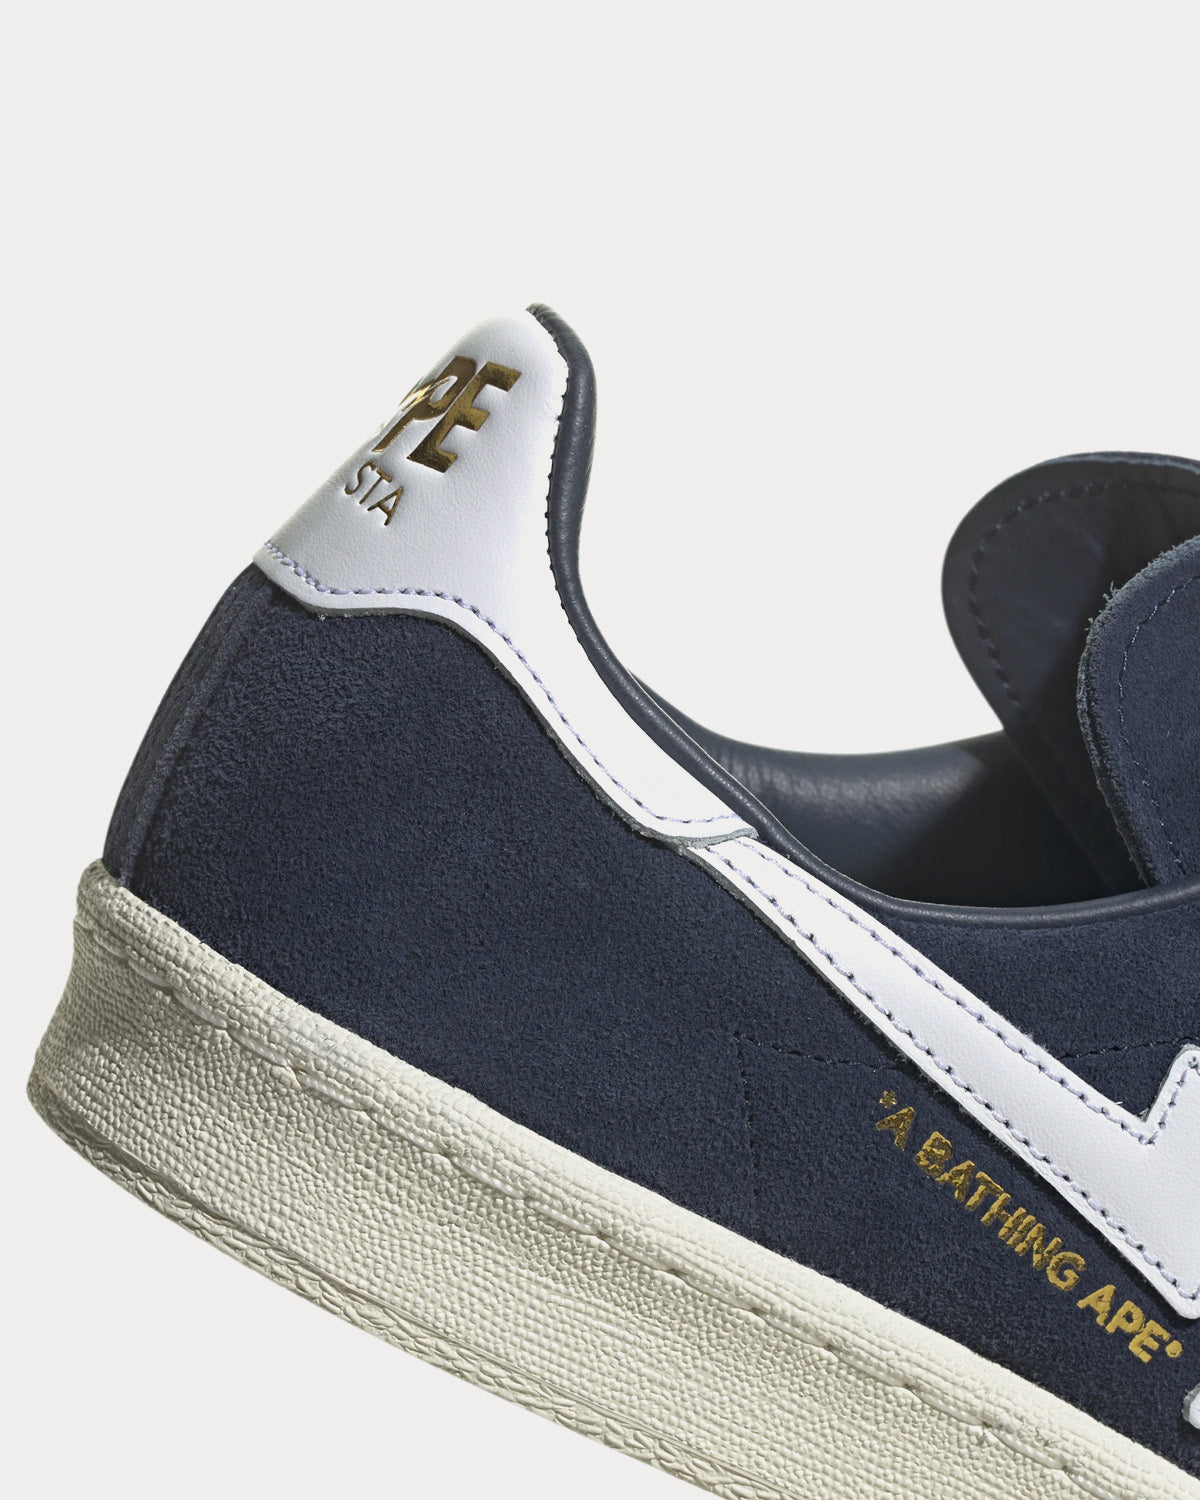 Adidas x BAPE - Campus 80s Collegiate Navy / Cloud White / Off-White Low Top Sneakers